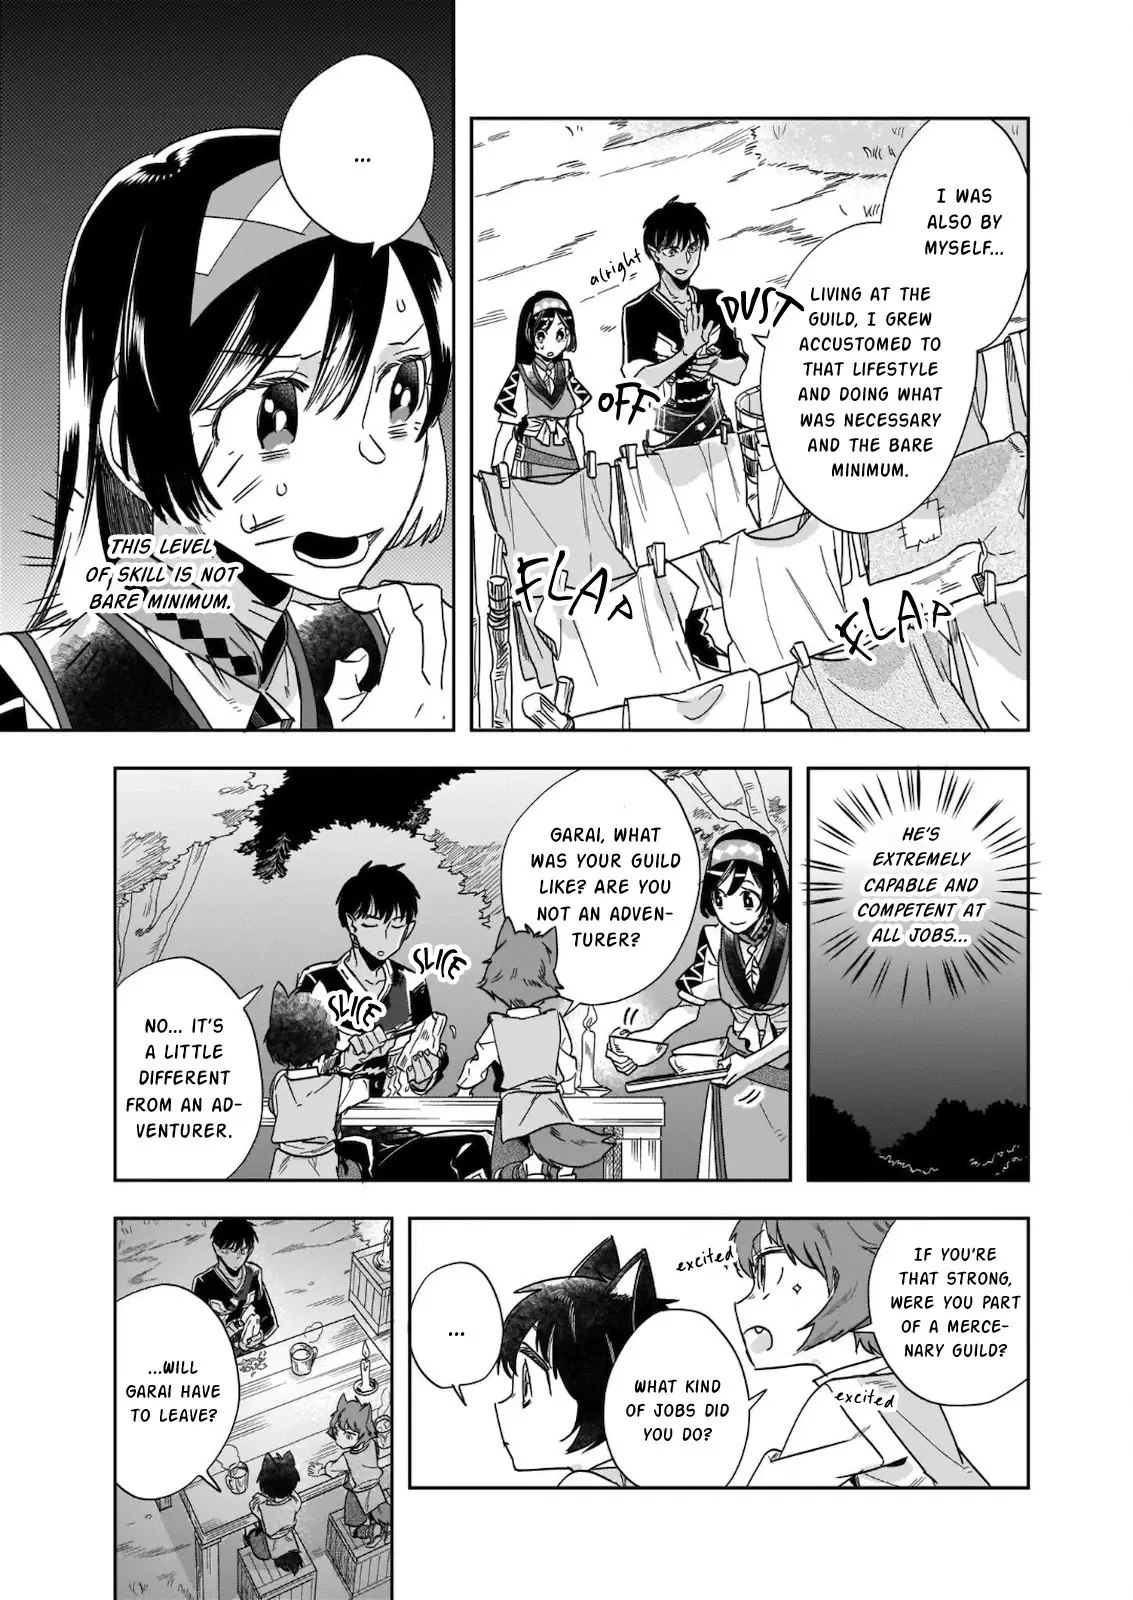 Home Centre Sales Clerk’S Life In Another World - 7 page 9-87b0f70c